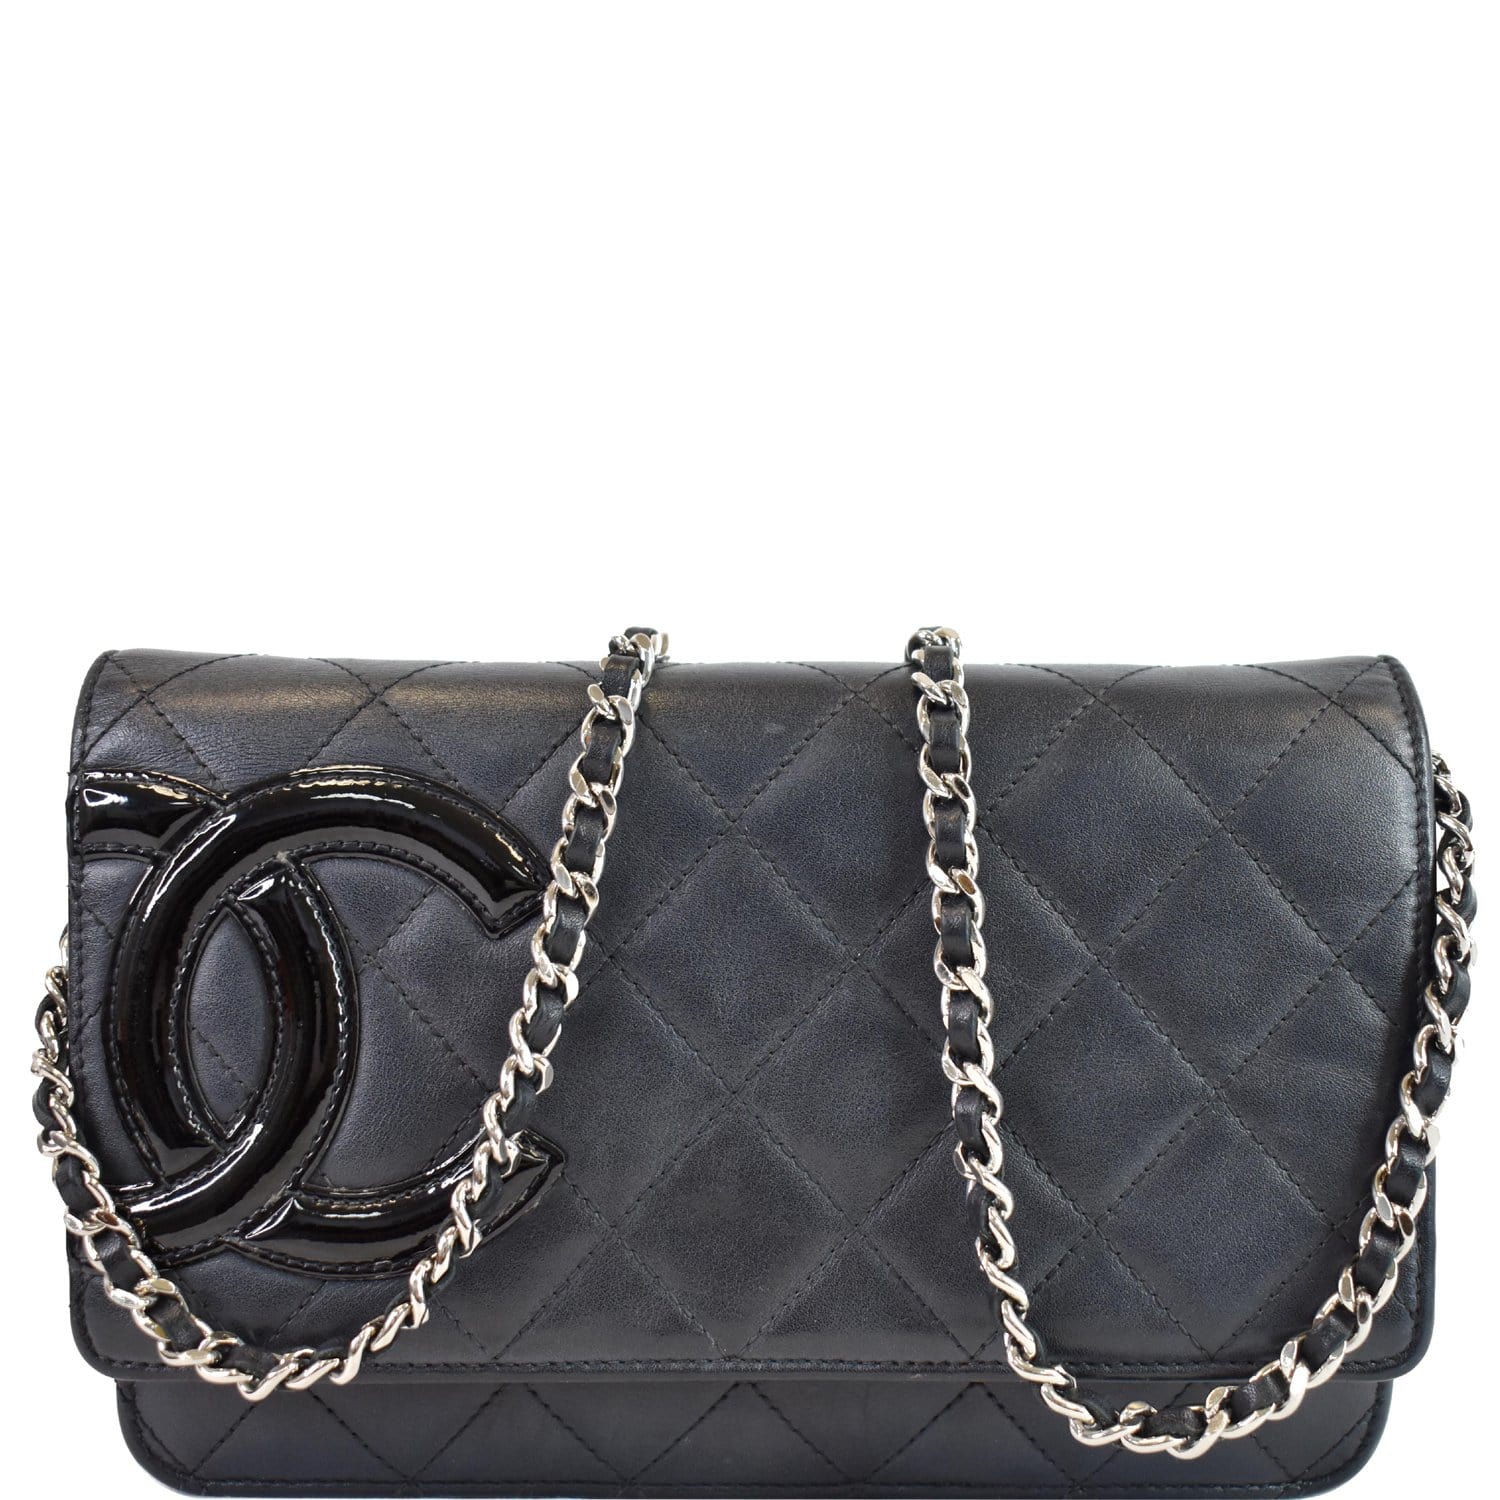 Chanel White/black Quilted Leather Ligne Cambon Pochette